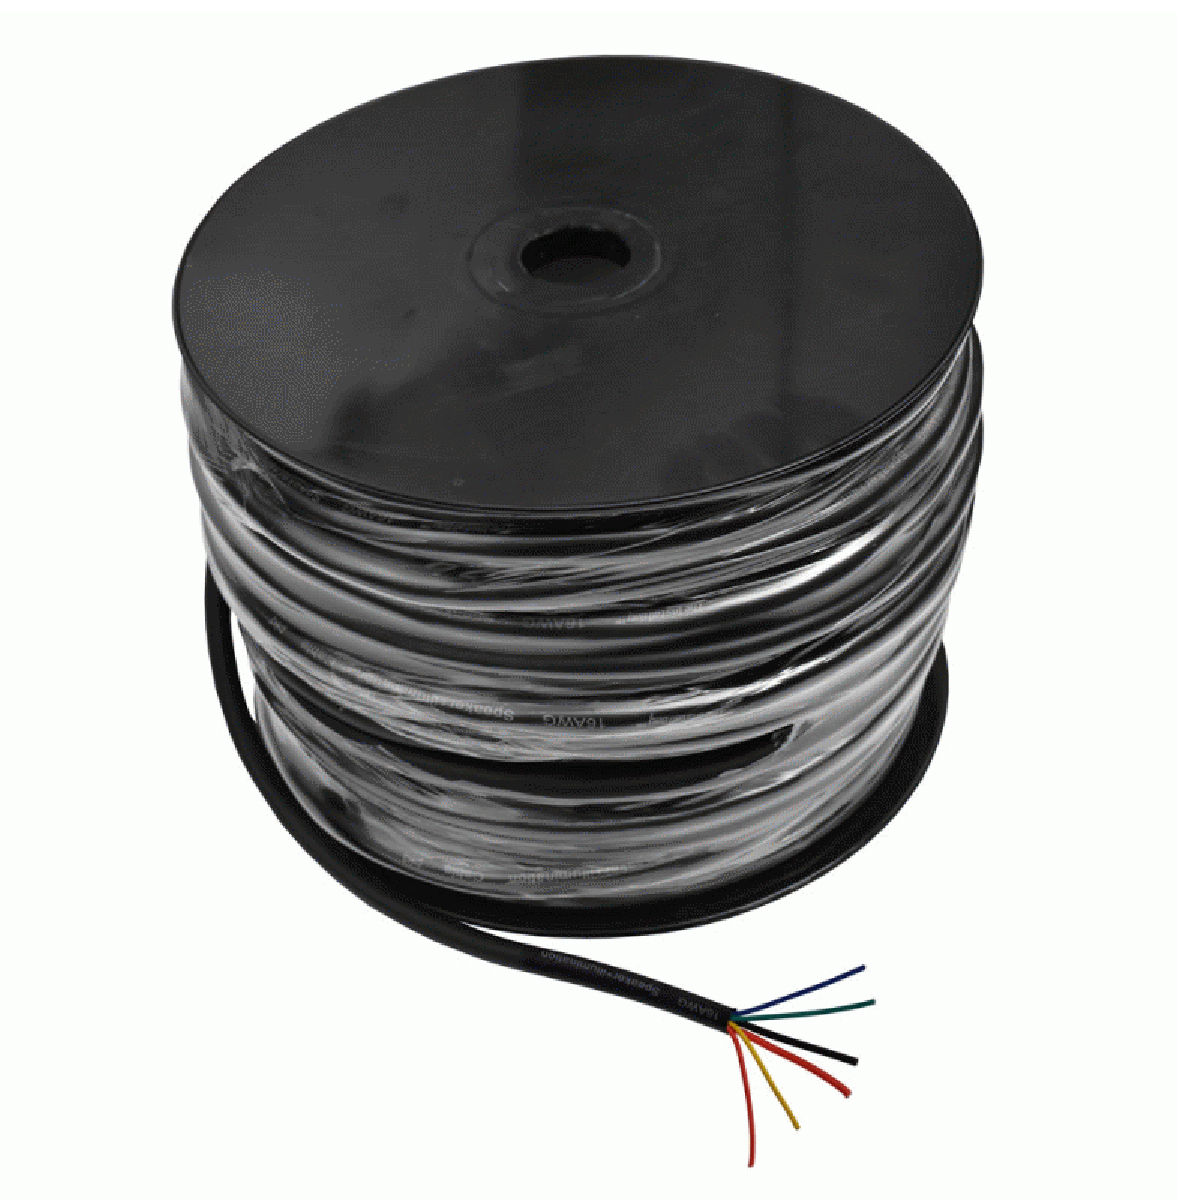 6 Conductor Wire 2 Spk 4 RGB Wires 250Ft